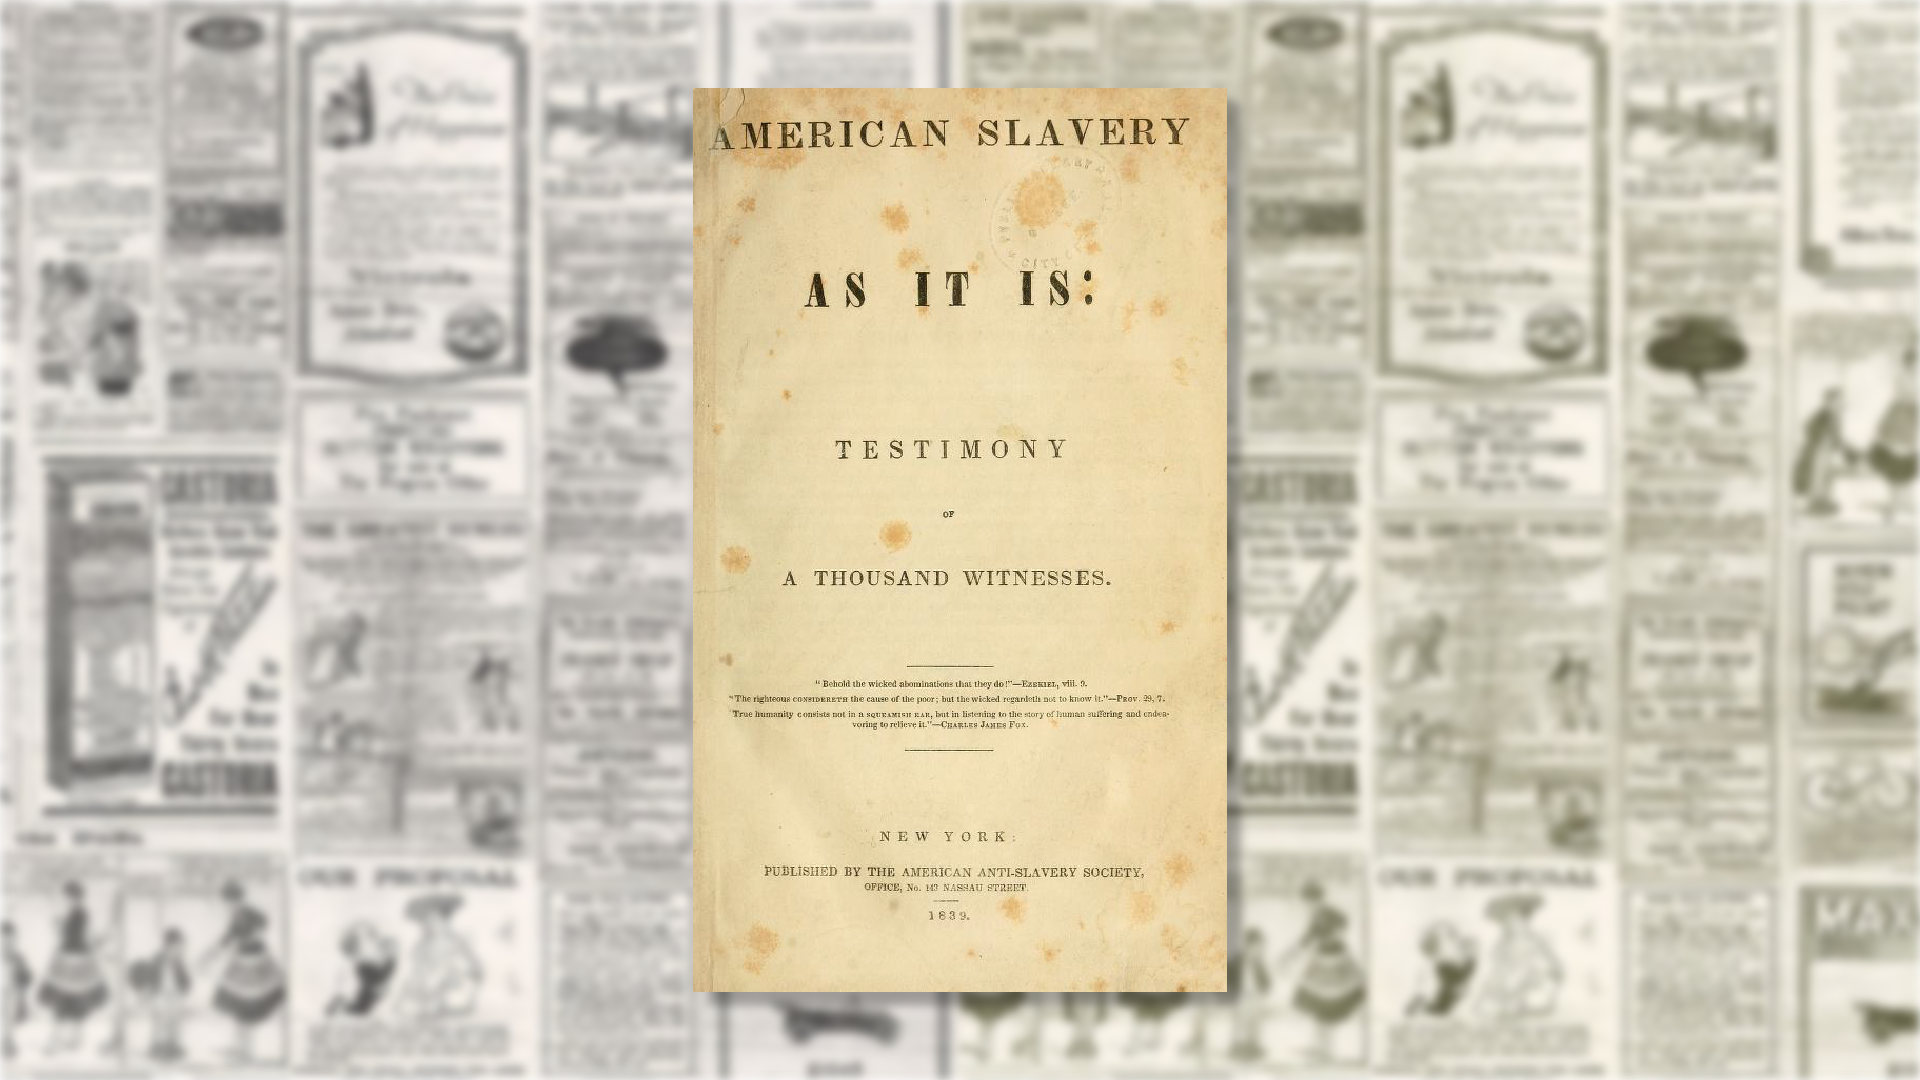 A scanned book title page, which reads "American Slavery. As It Is: Testimony of A Thousand Witnesses" The cover is laying on top of a blurry newspaper spread.